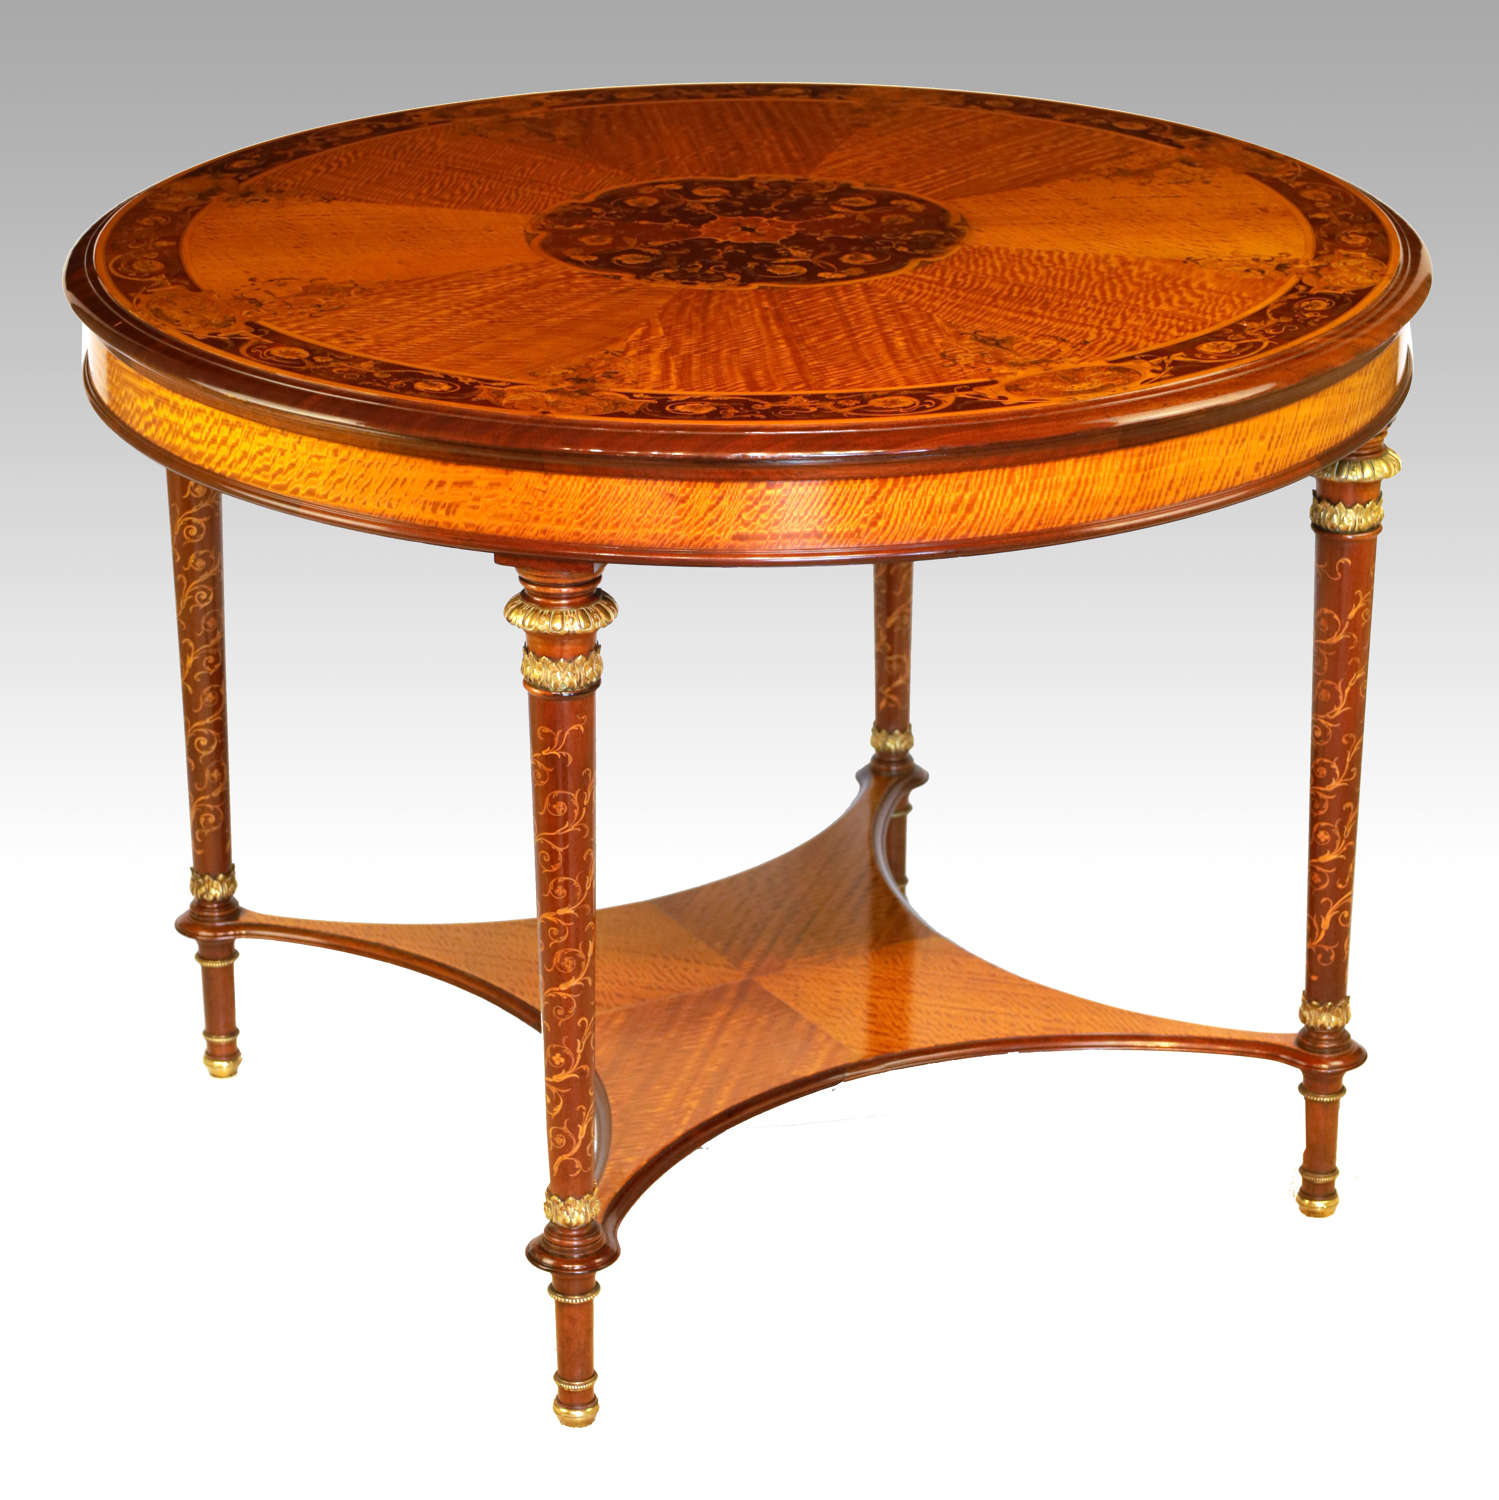 An Exhibition Quality Inlaid Satinwood Collinson & Lock Centre Table